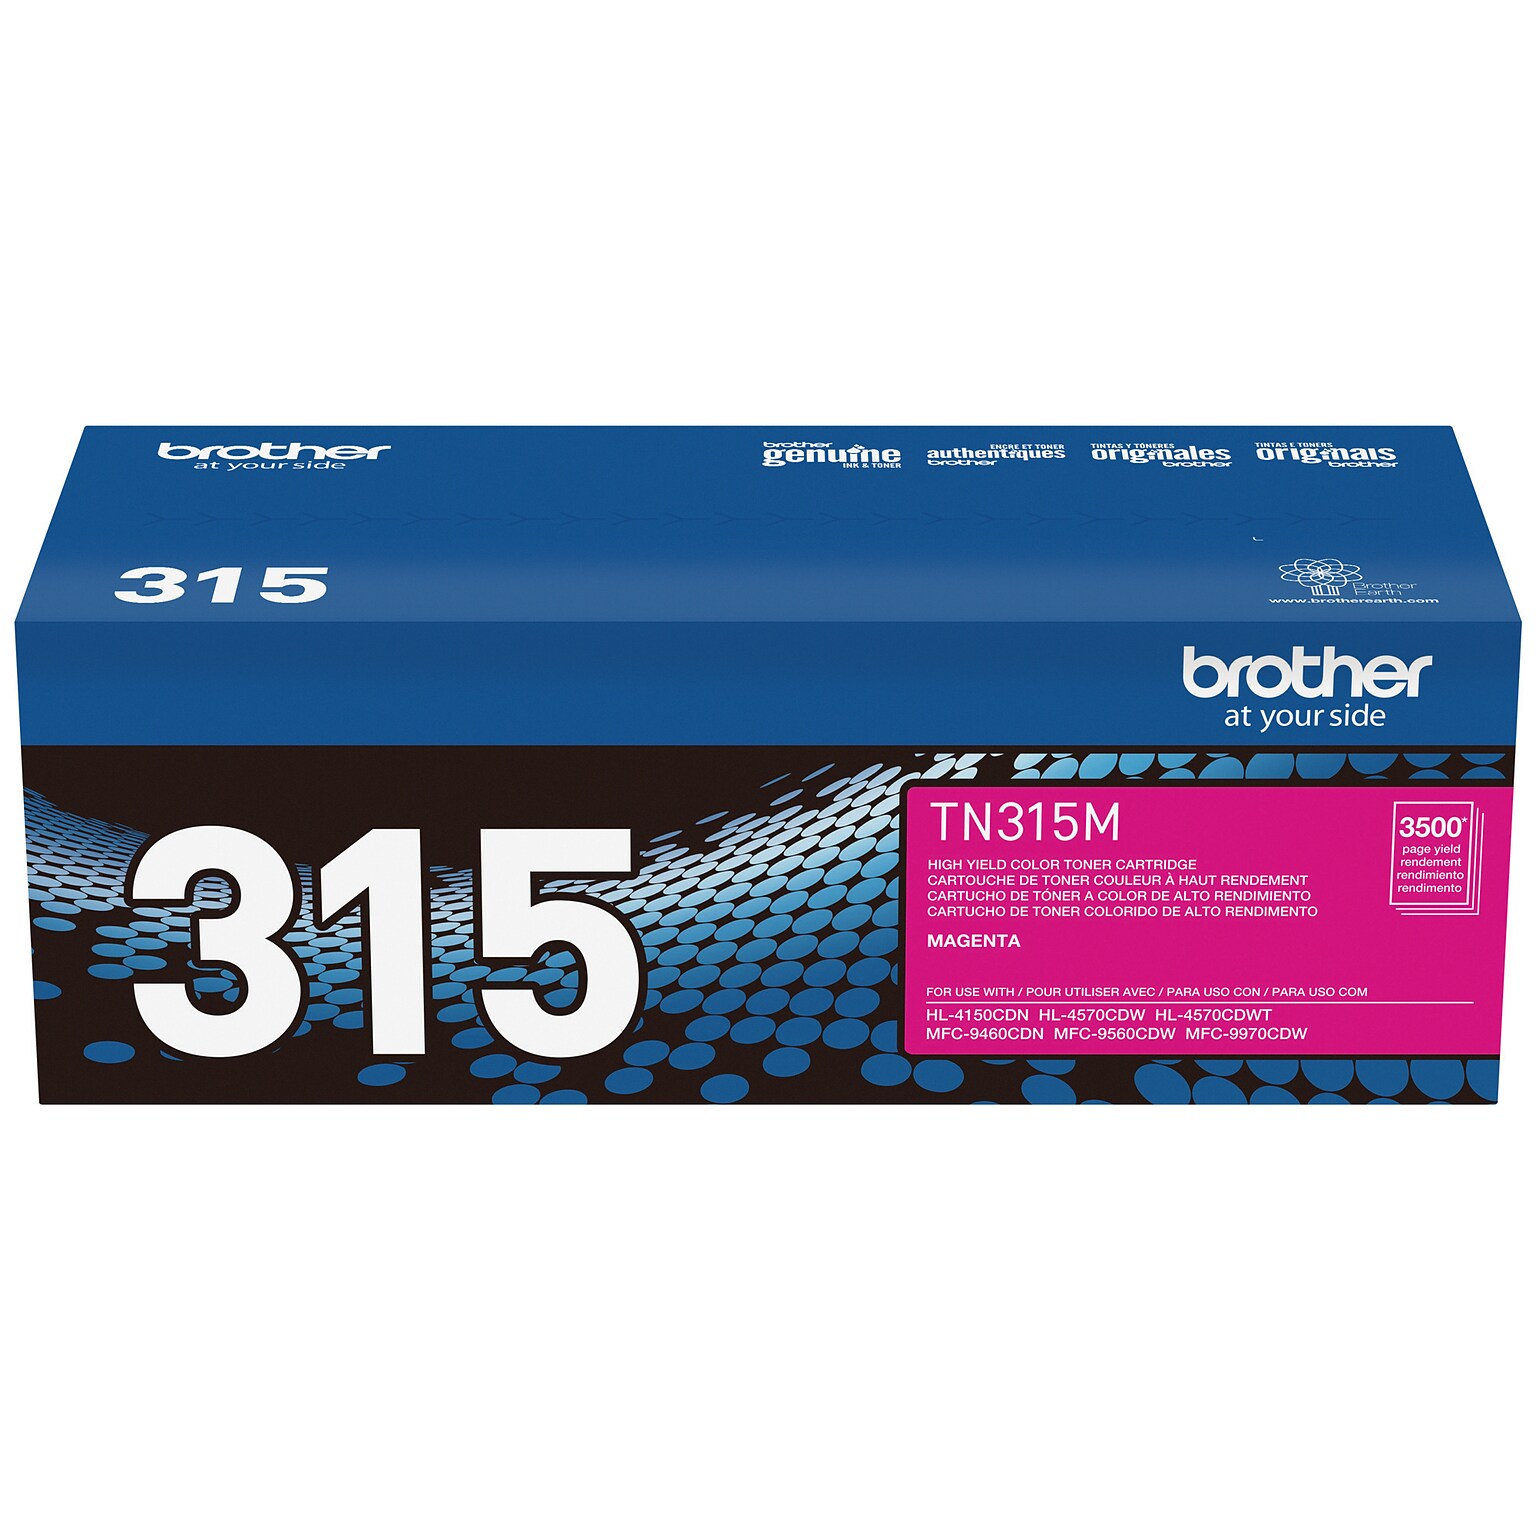 Brother TN-315 Magenta High Yield Toner Cartridge, Print Up to 3,500 Pages (TN315M)